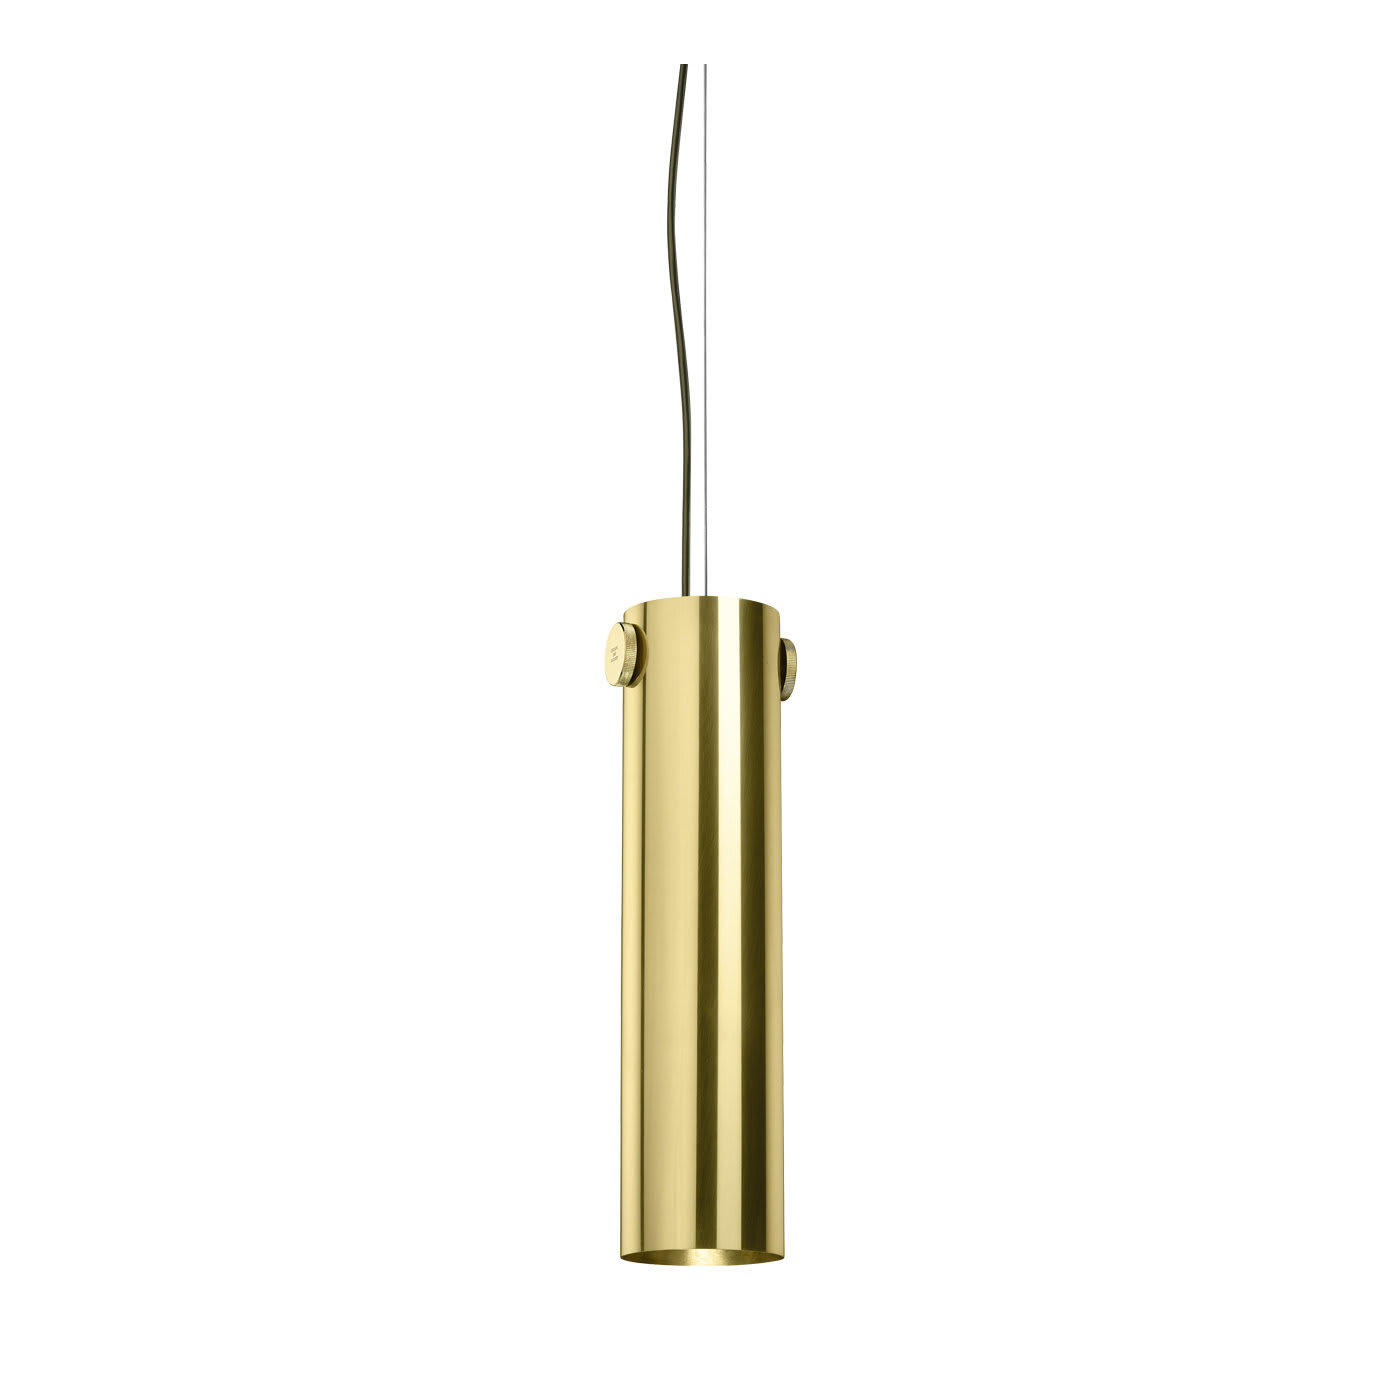 Cylinder Suspension Lamp in Polished Brass By Richard Hutten - Ghidini 1961